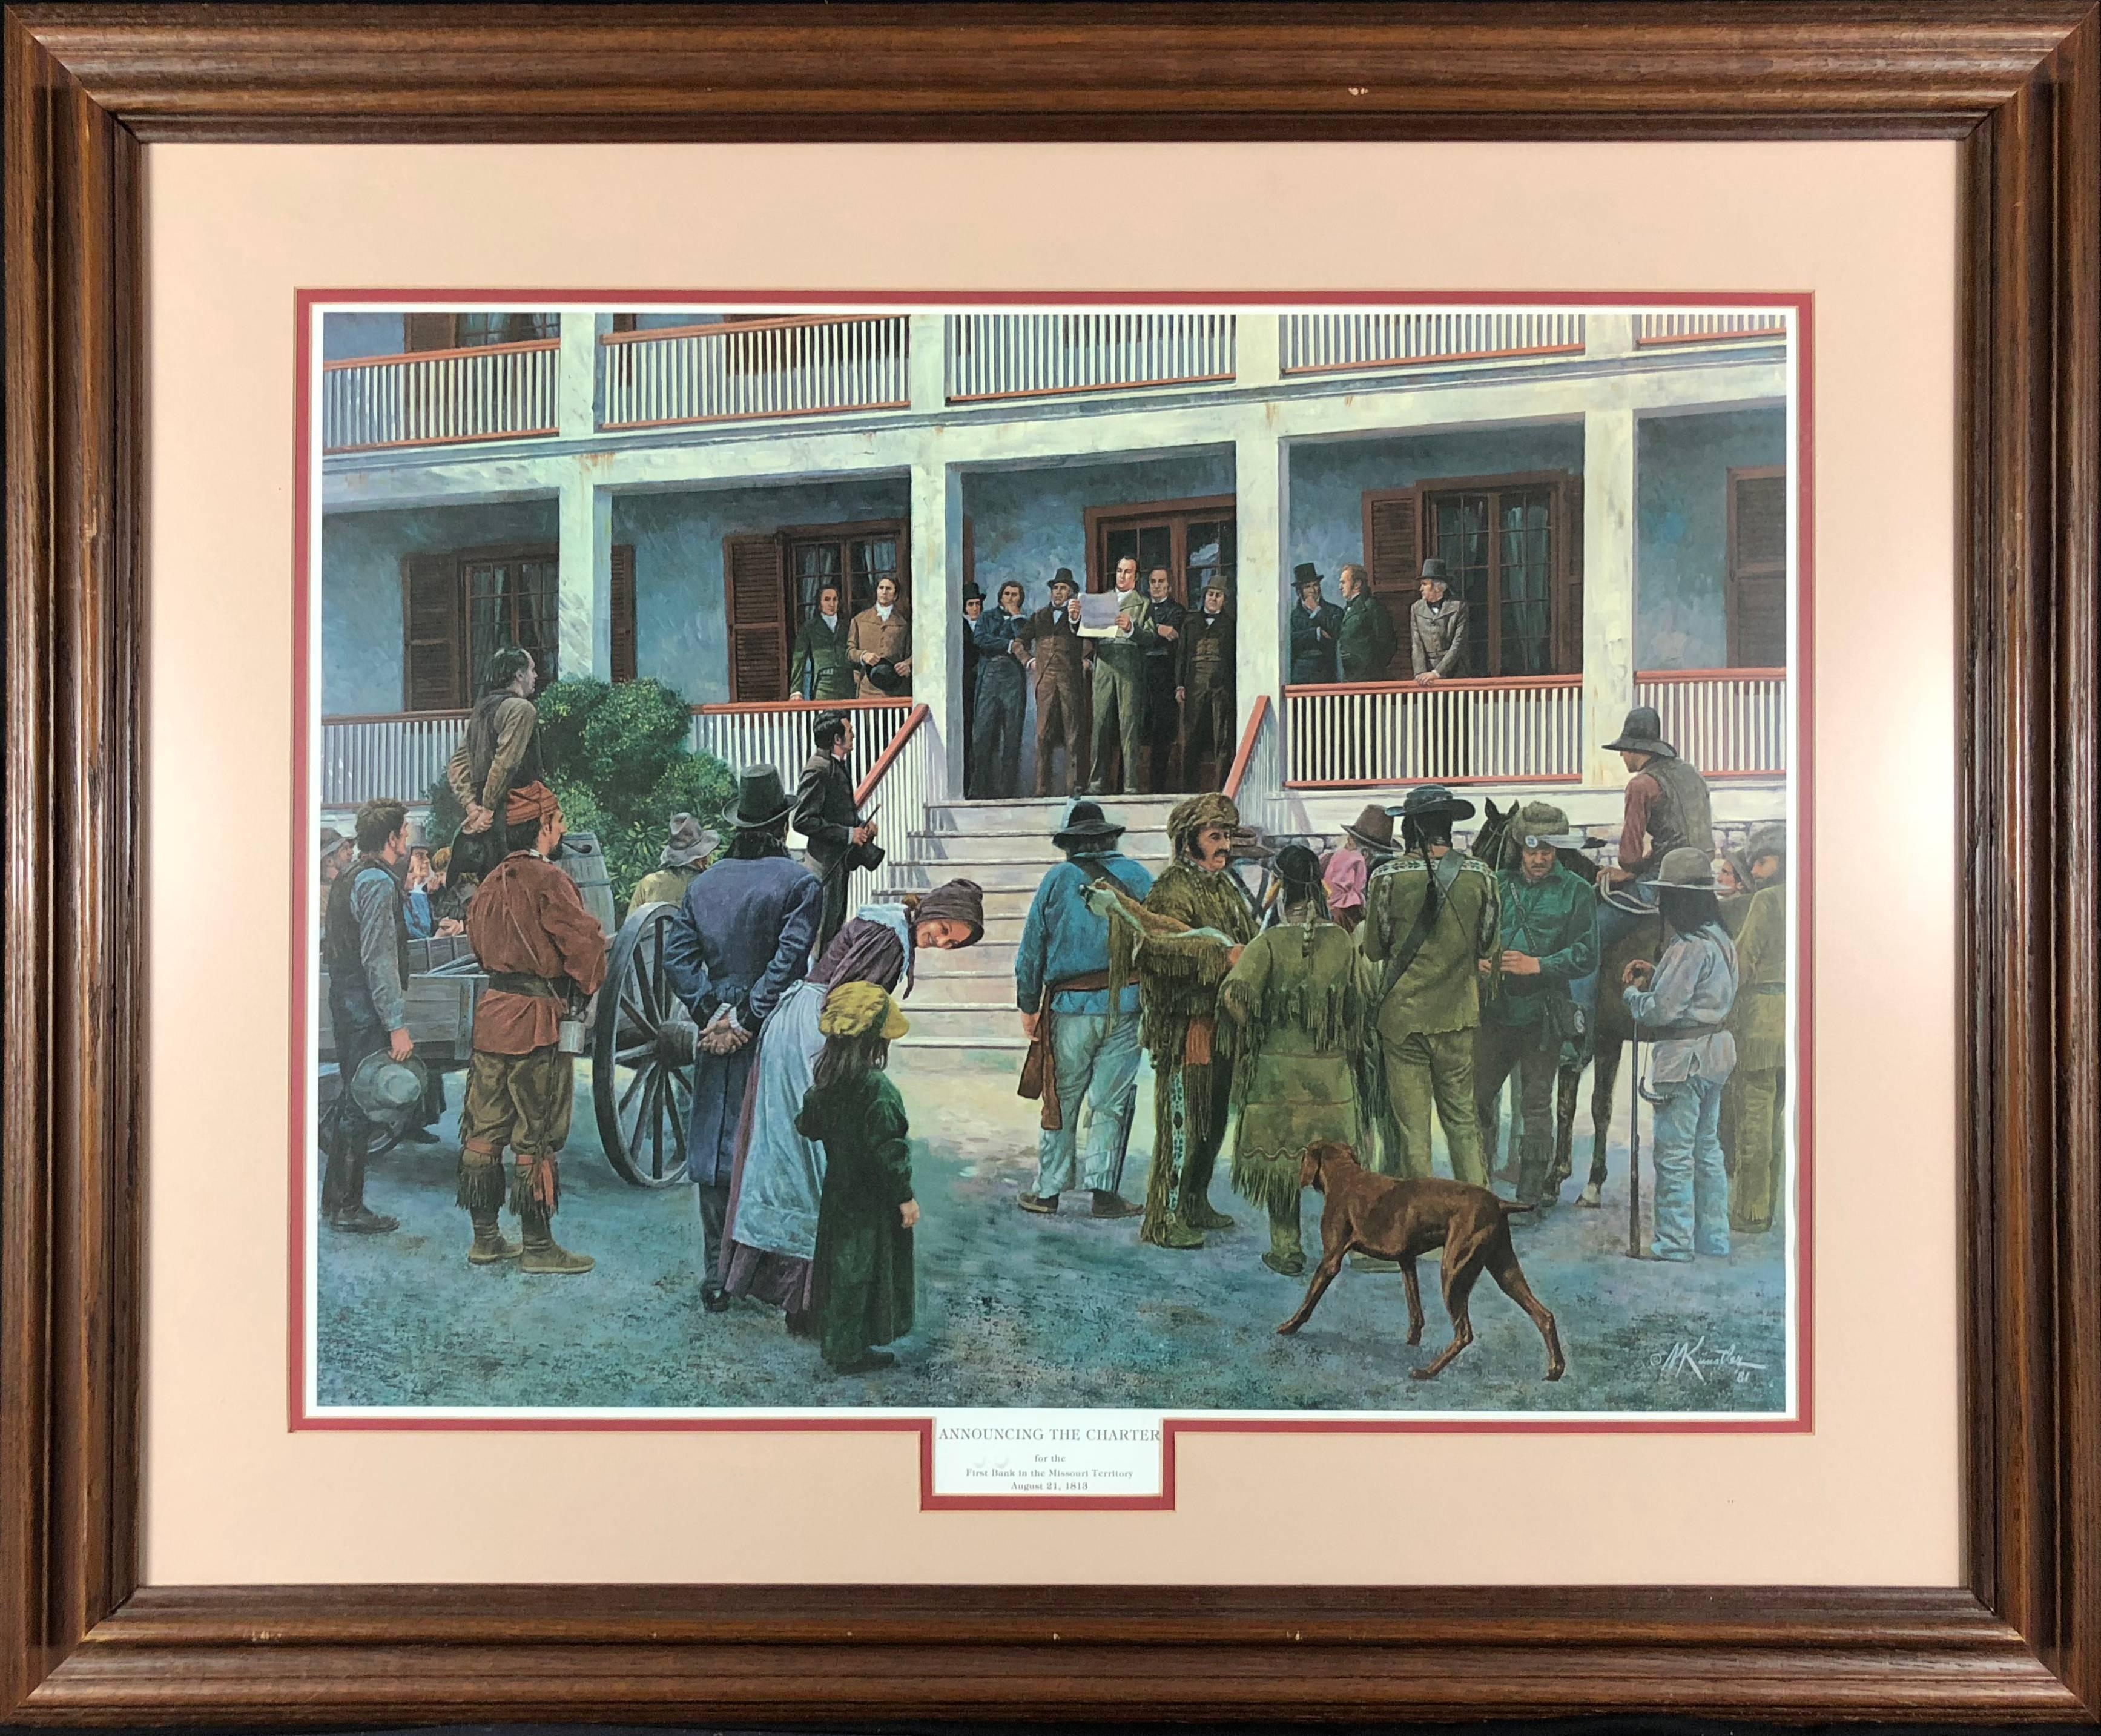 Mort Künstler Figurative Print - Announcing the Charter for the First Bank in the Missouri Territory 1813